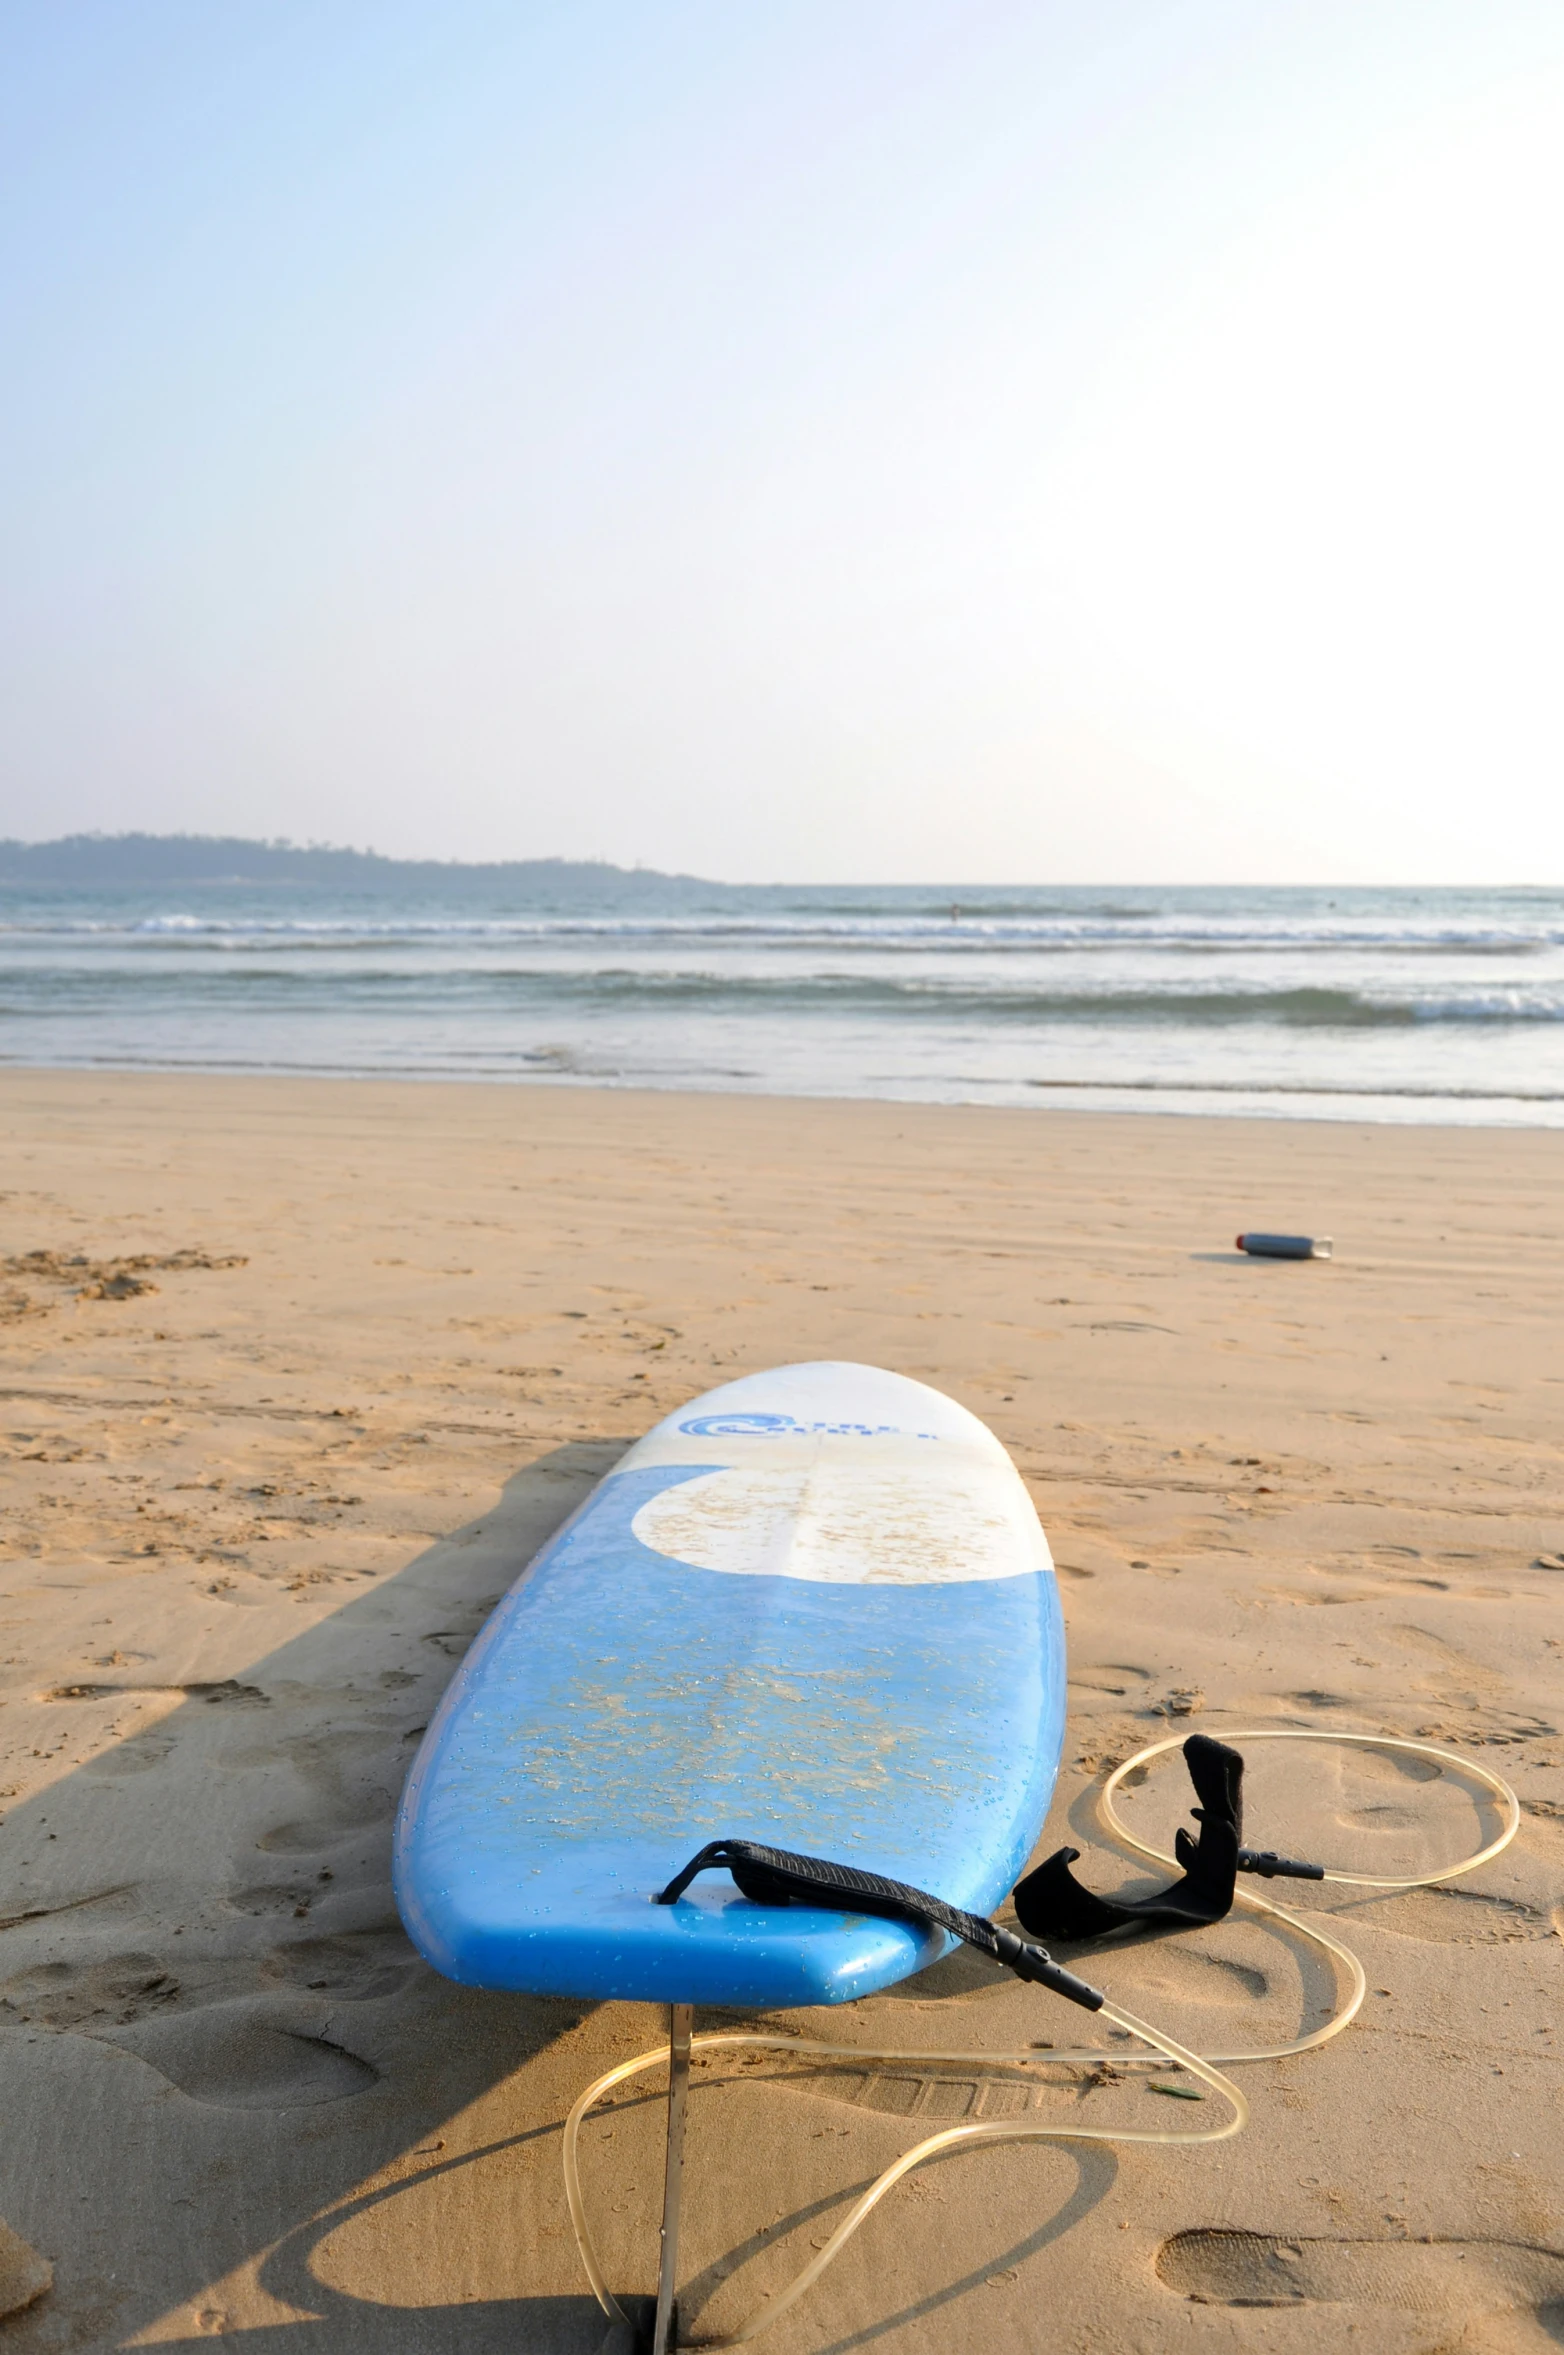 a surfboard resting on the sand at the beach